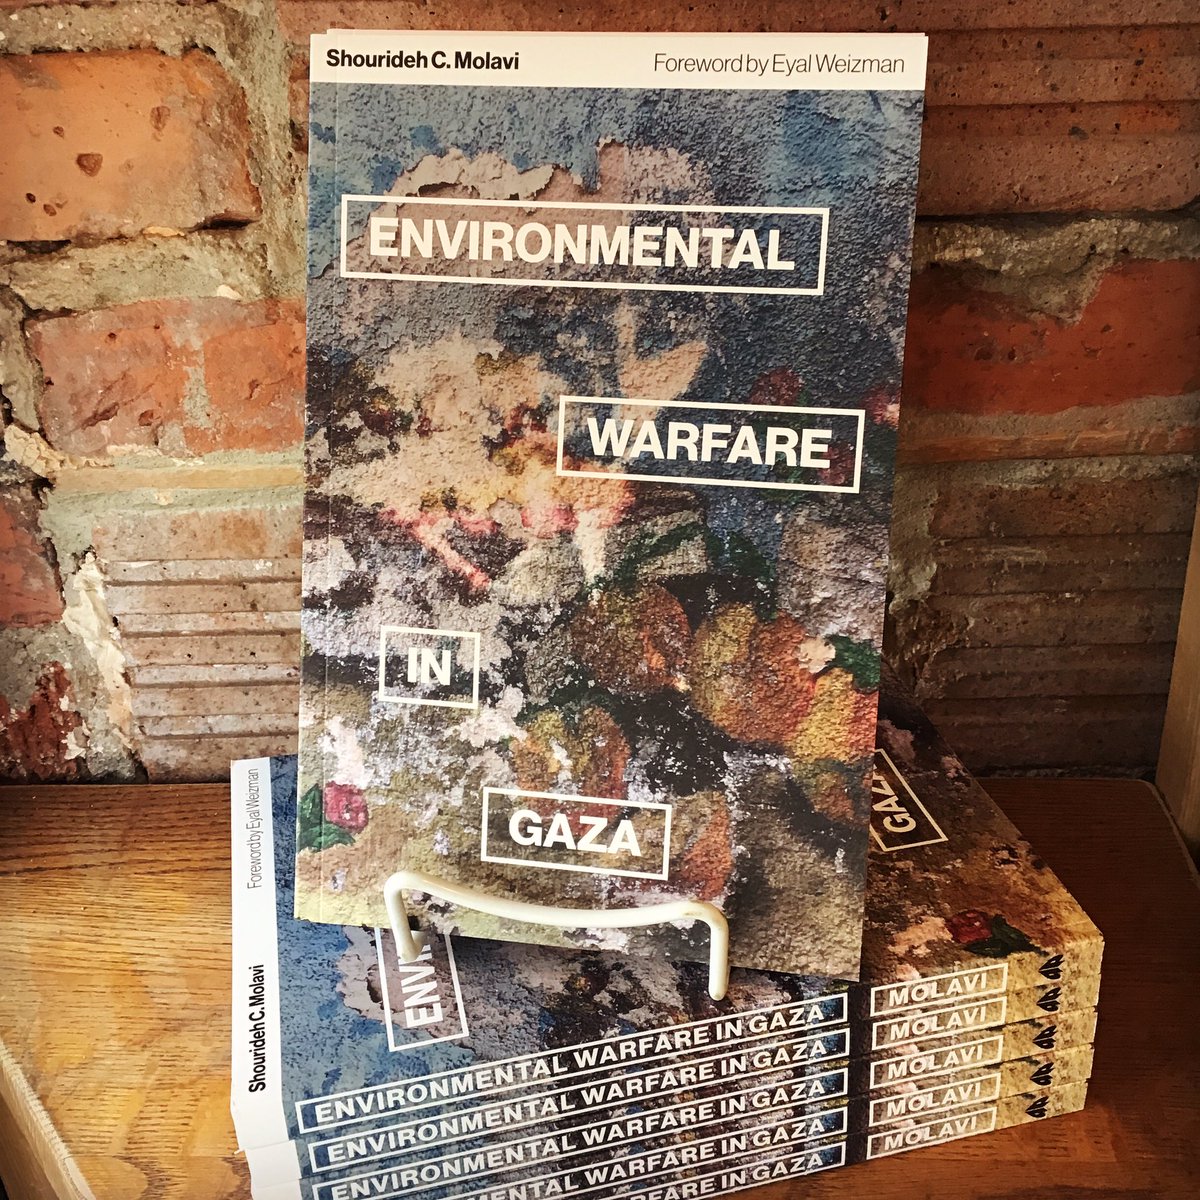 “This book is a vivid document of this latest stage of Israeli warfare, including original maps, images, and visualizations which deepen our understanding of its environmental and human impact.” burningbooks.com/products/envir…